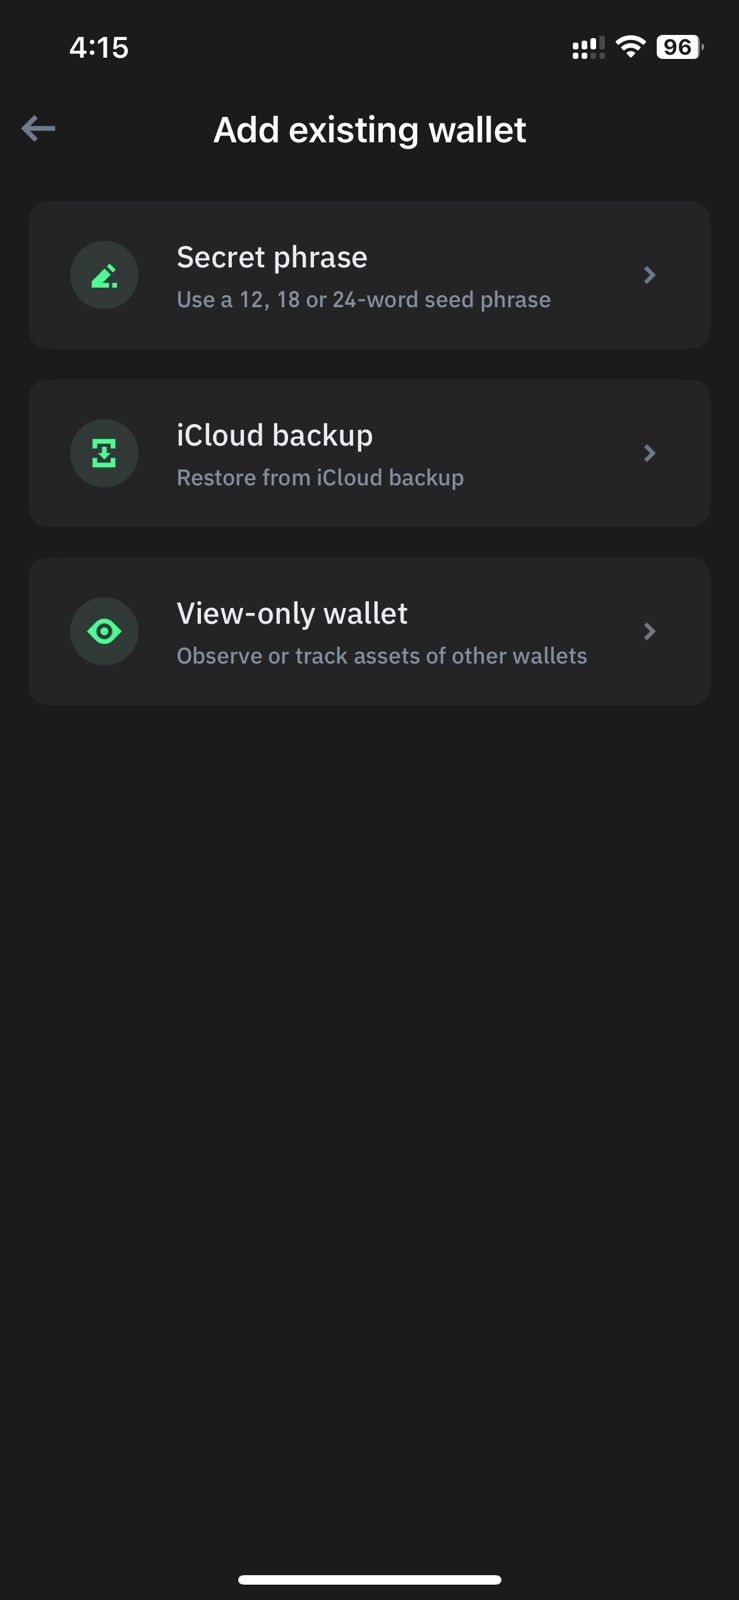 View-only wallet trust wallet